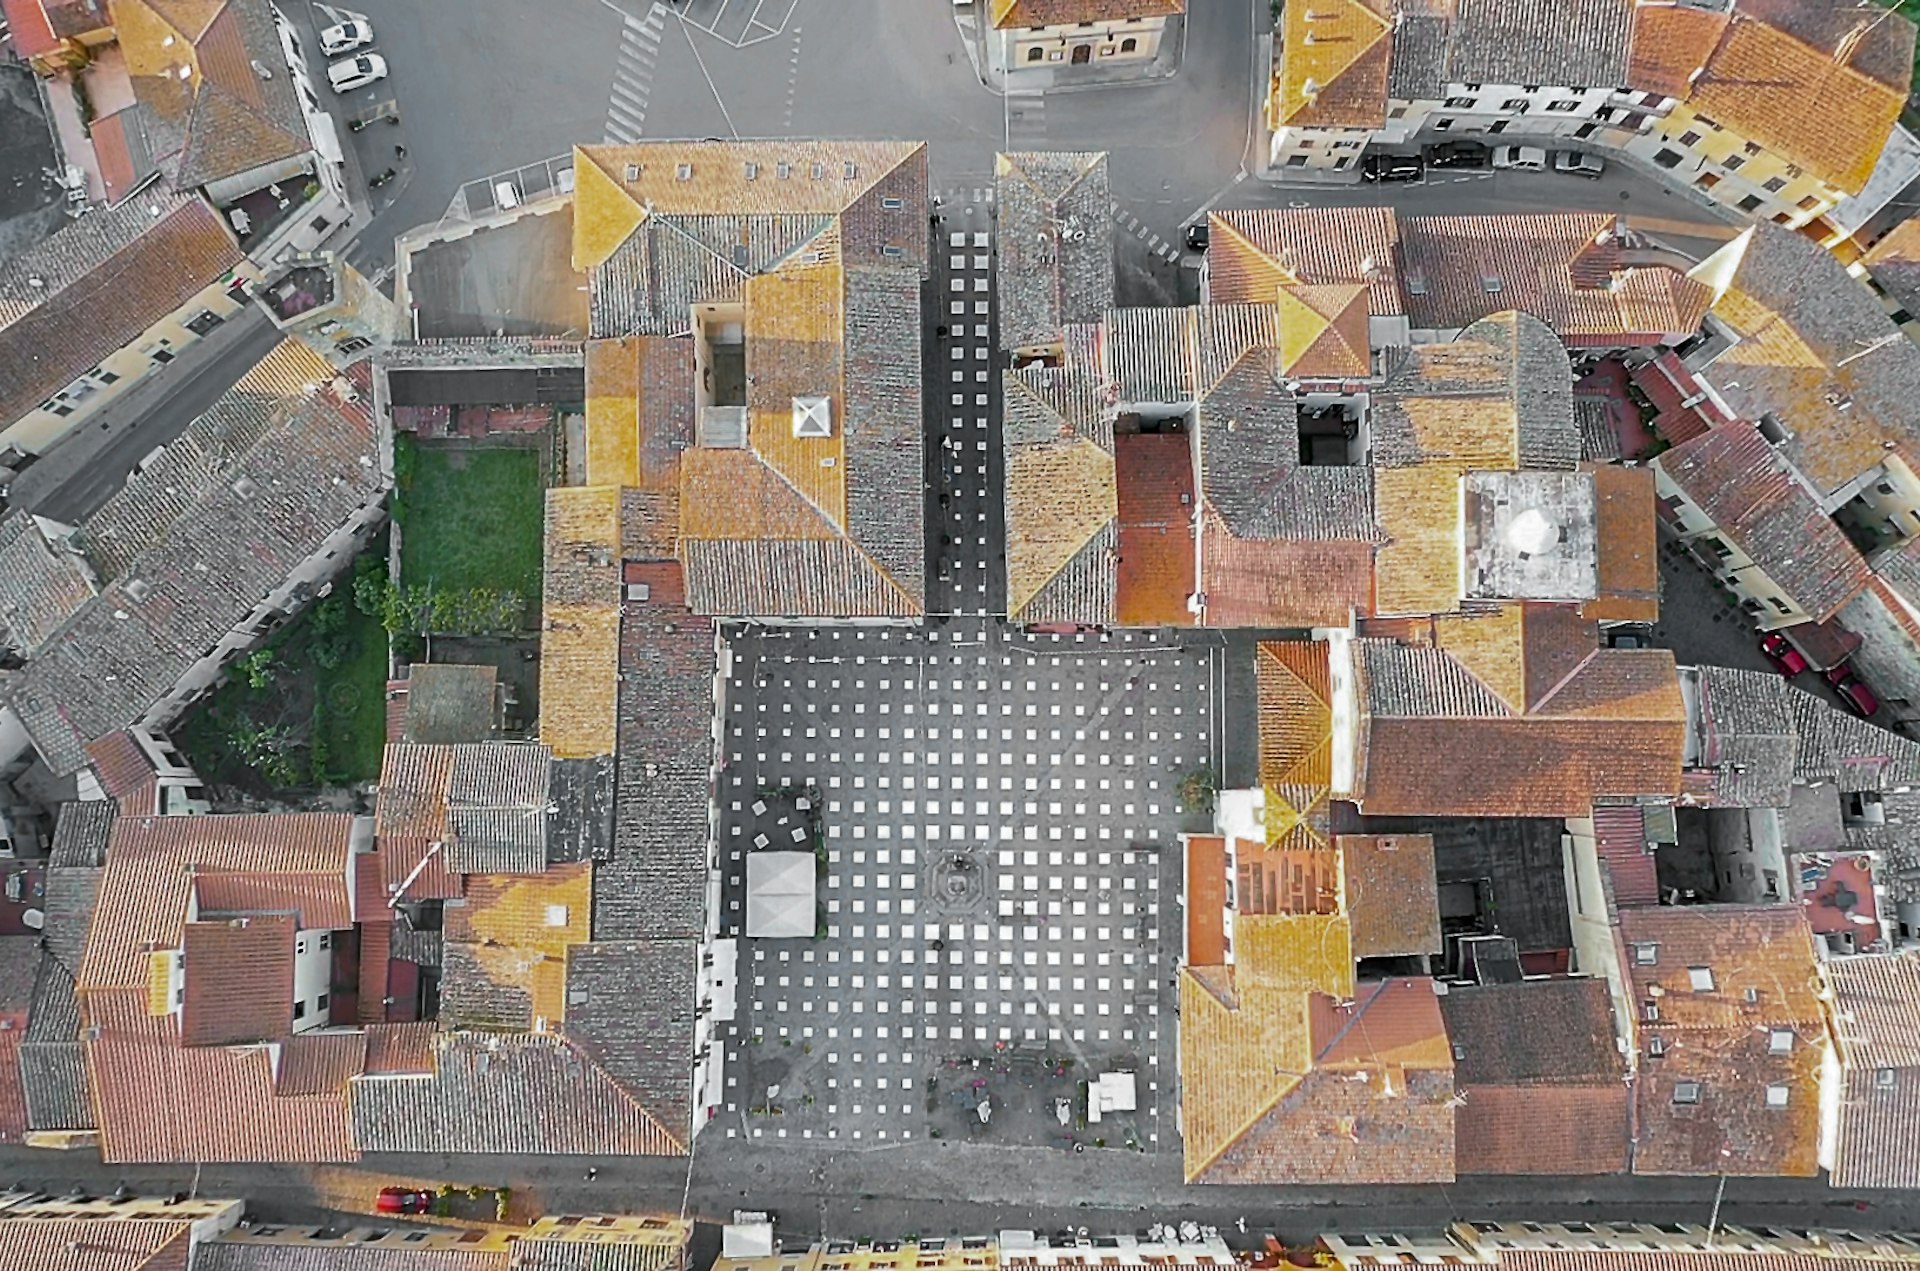 An aerial view of the StoDistante installation located on Piazza Giotto in the town of Vicchio in Italy